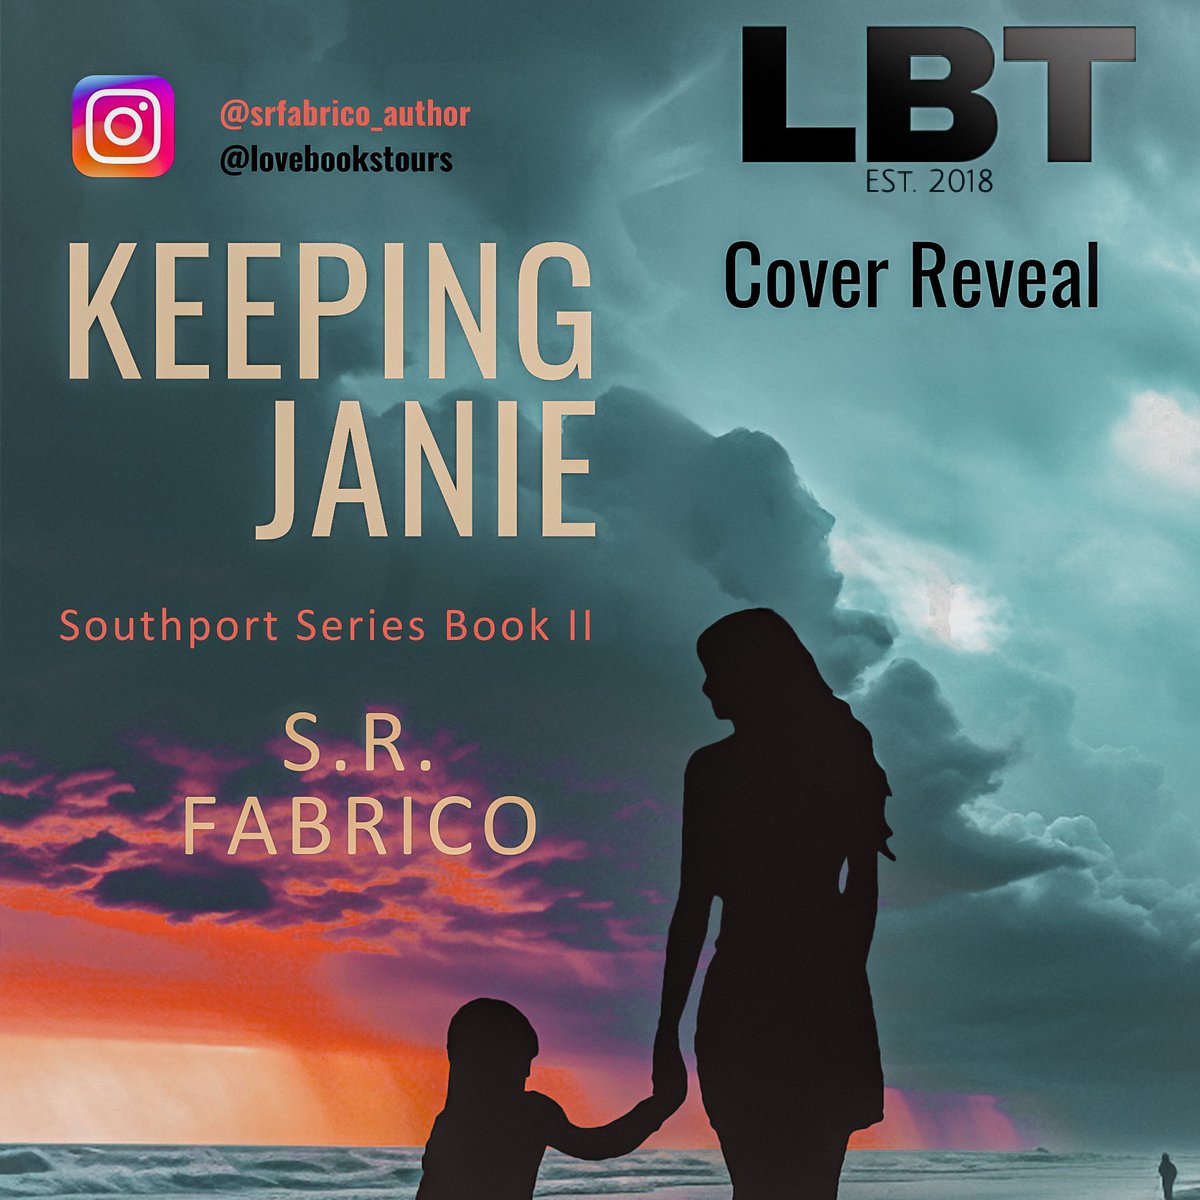 Keeping Janie (Book 2 of the Southport Series) by SR Fabrico
Cover Reveal 15th Nov

#BookTwitter  #FreeReview #FreeBookReview #CallHerJanie #KeepingJanie #SRFabrico #SouthportSeries #Suspense #Thriller #SmallTownRomance #SmallTown #SouthernFiction #LBTCrew #bookx